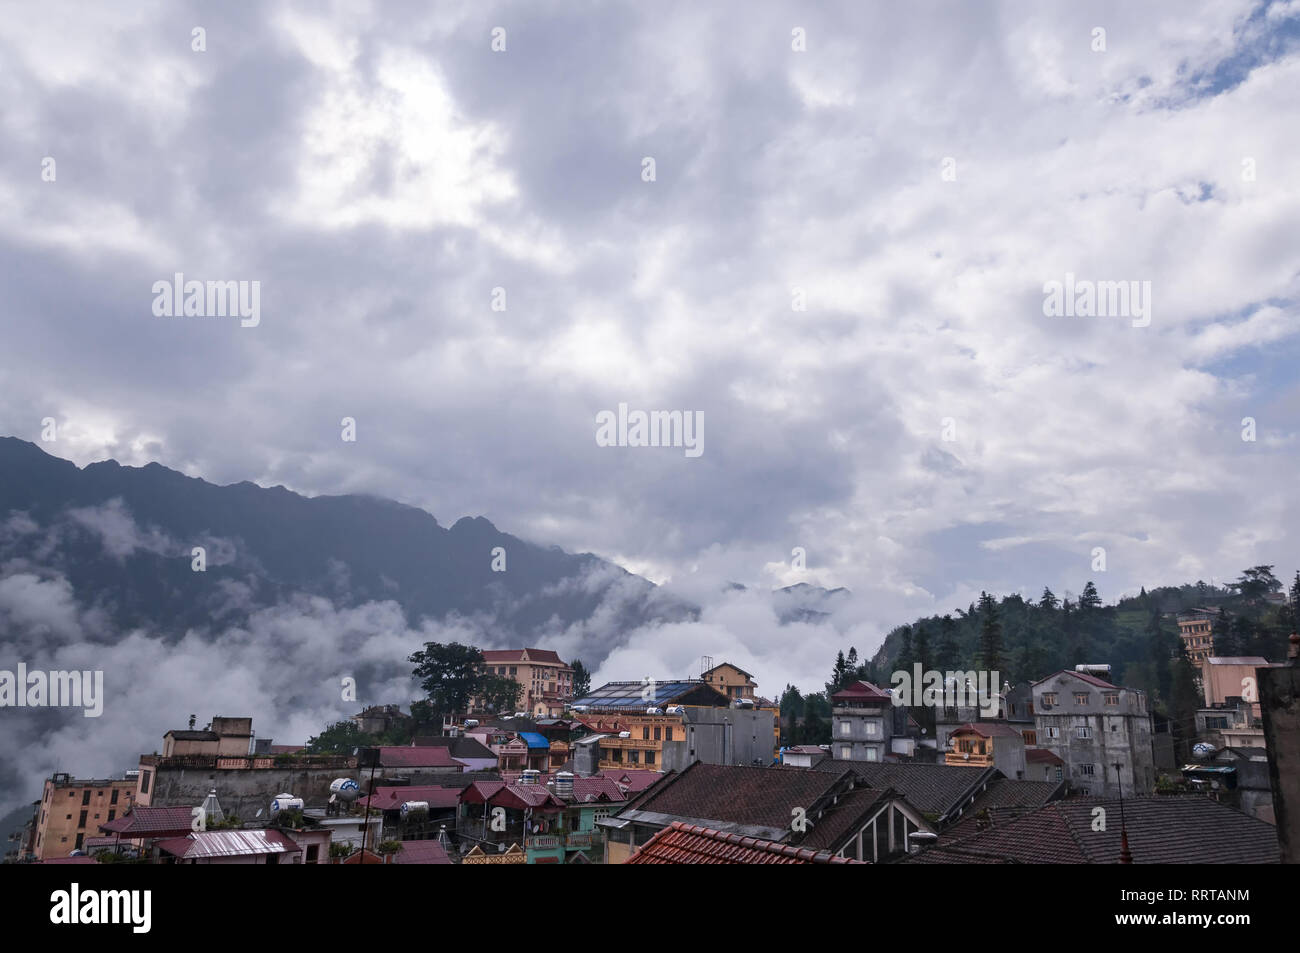 Sa Pa town with Fansipan mountains in background covered in clouds on an overcast afternoon, Vietnam Stock Photo